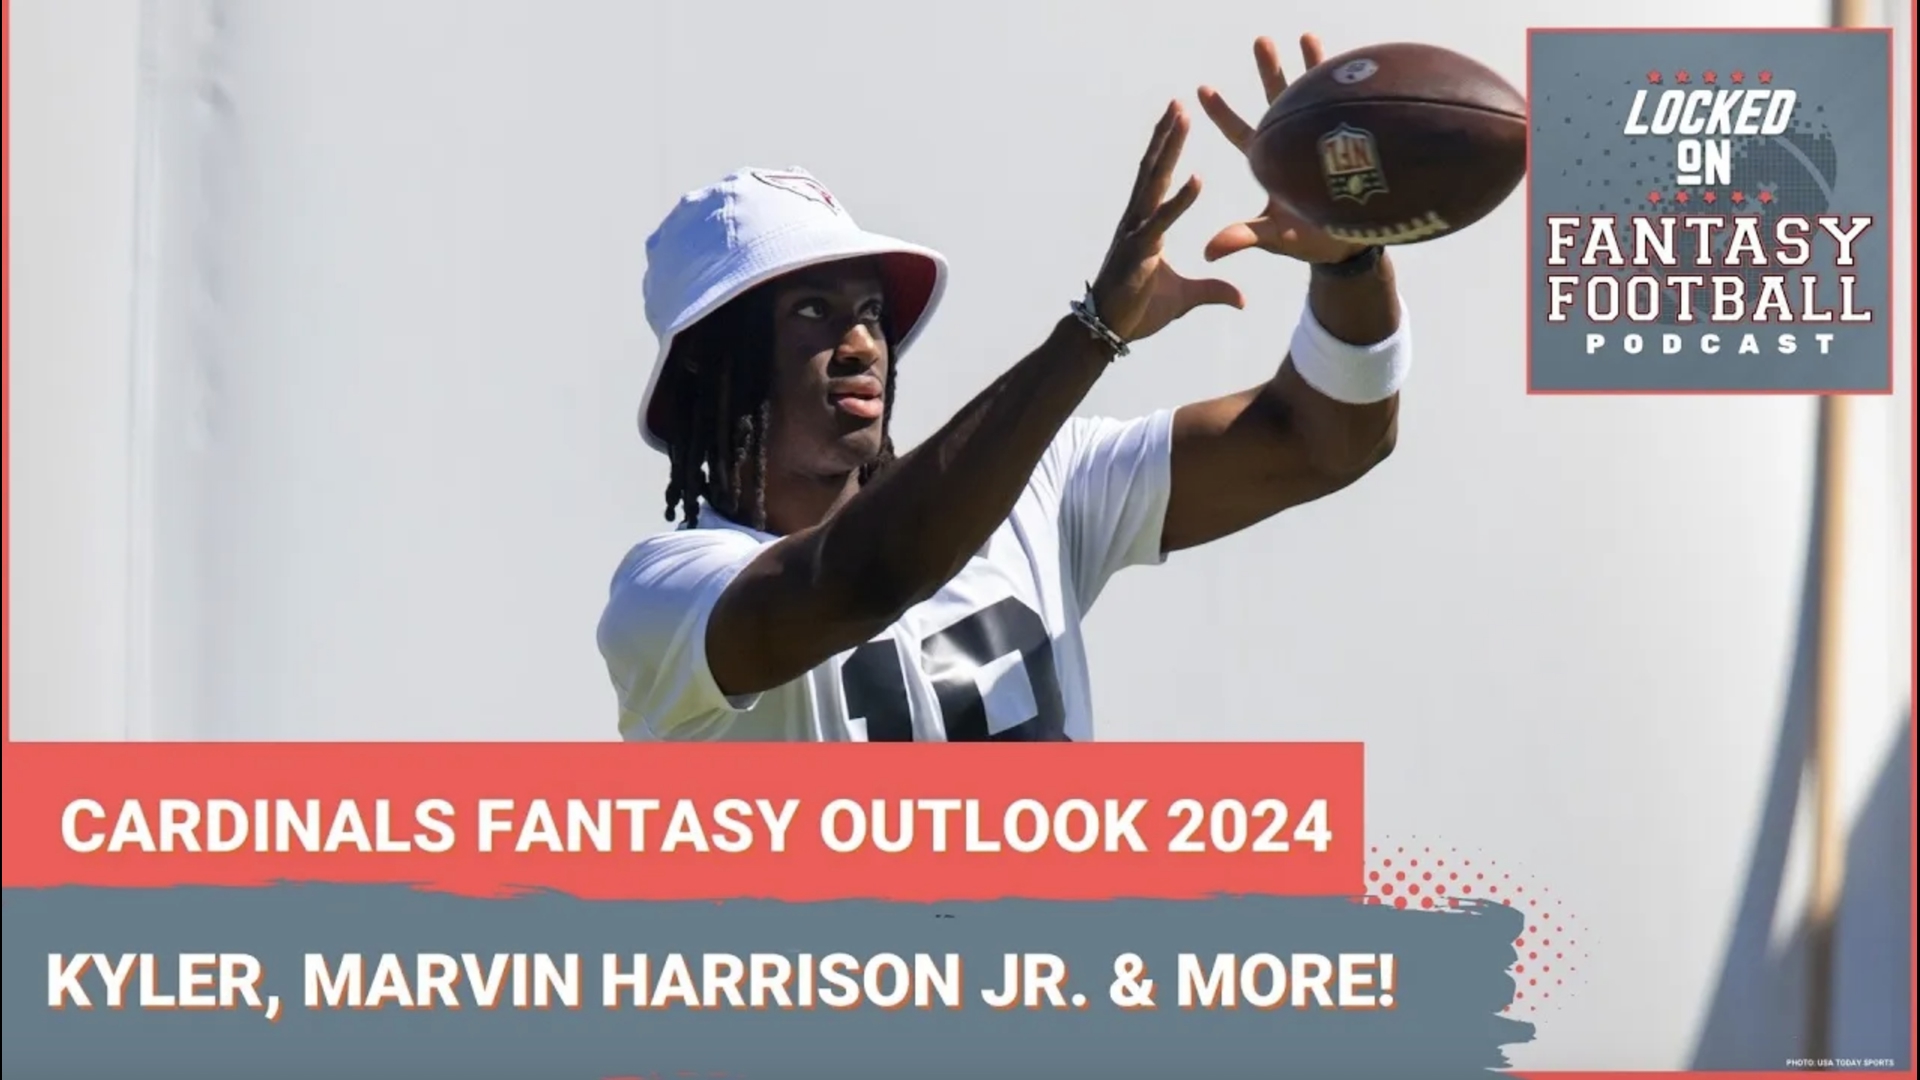 Sporting News.com's Vinnie Iyer and NFL.com's Michelle Magdziuk break down the fantasy football potential of the 2024 Arizona Cardinals